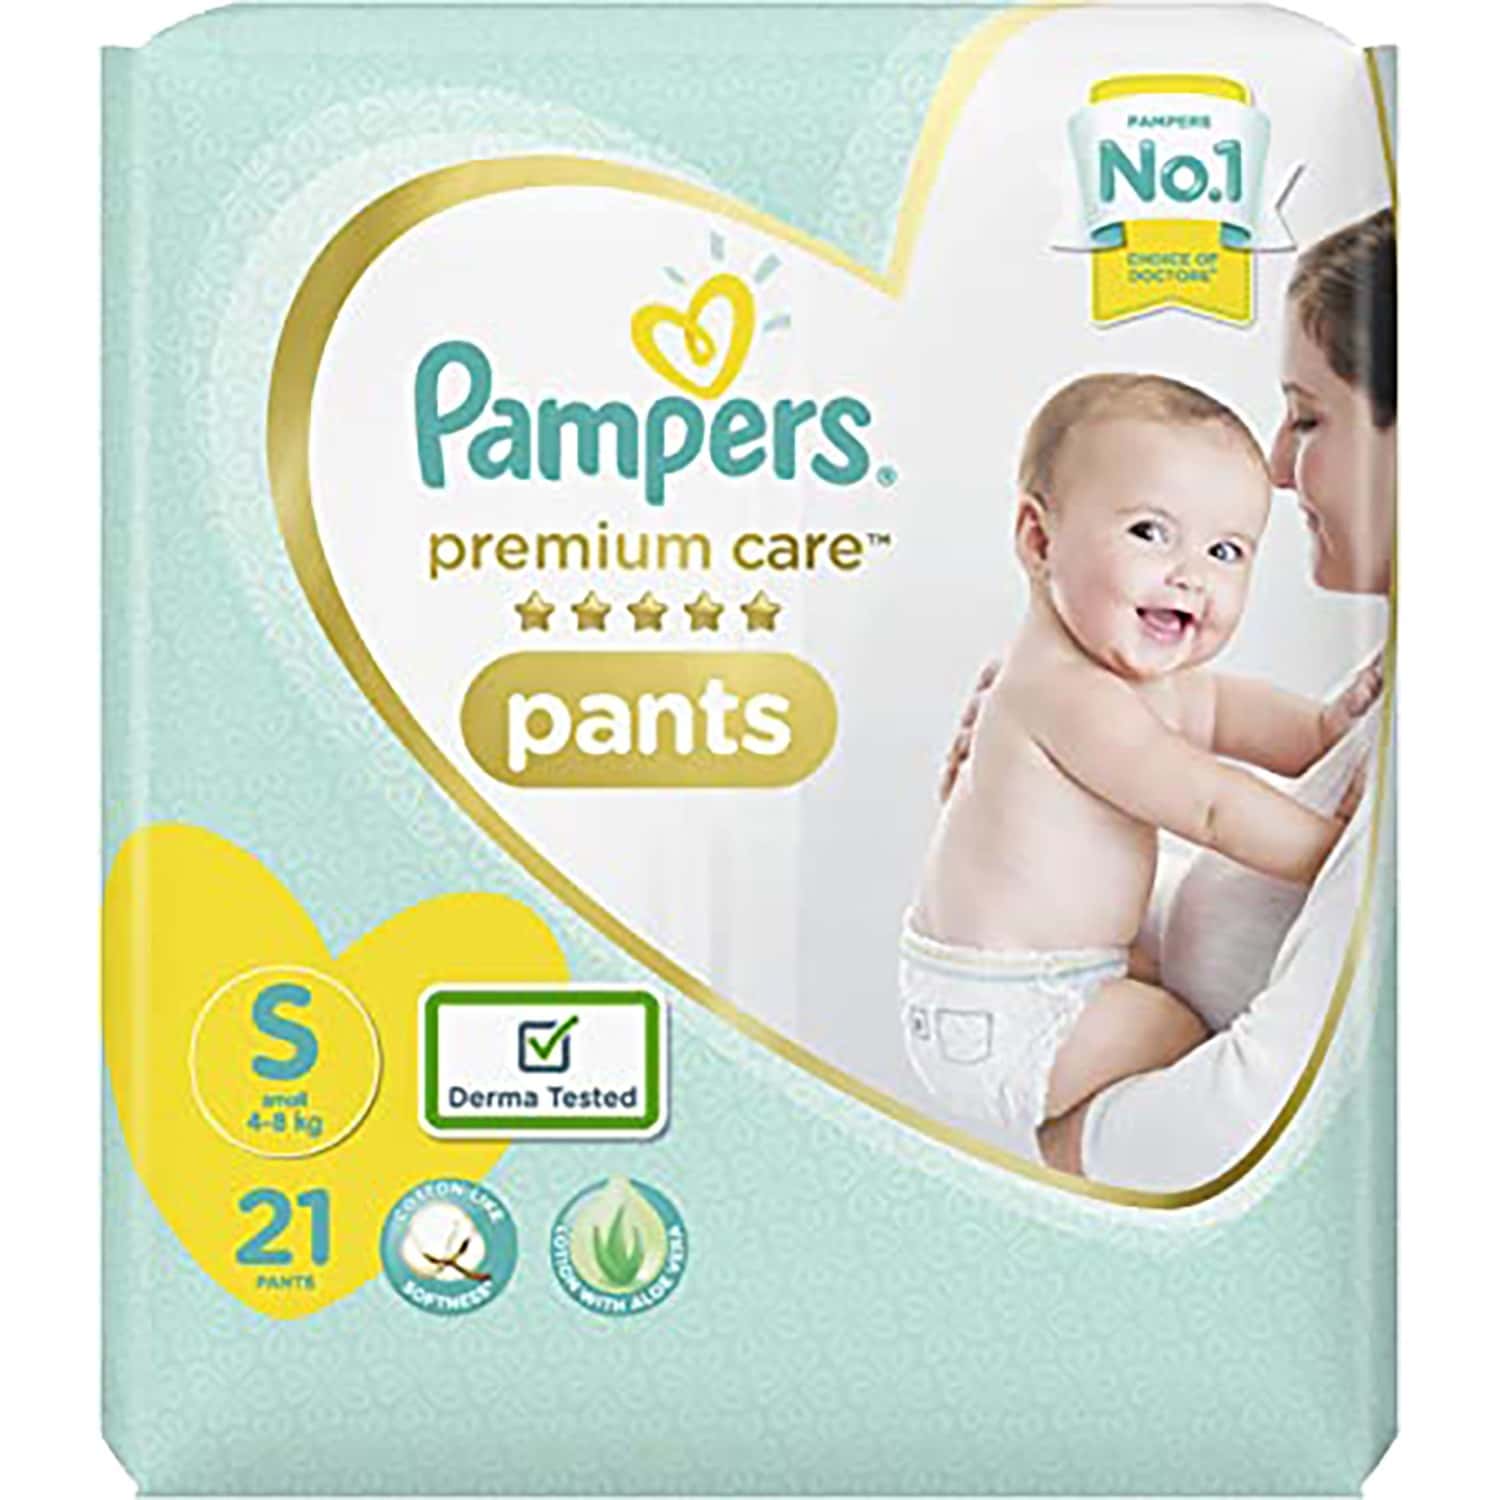 Pampers Premium Care Pants 32 Pack Diapers IDN IMPORT Made in Japan Sz  Small for sale online | eBay